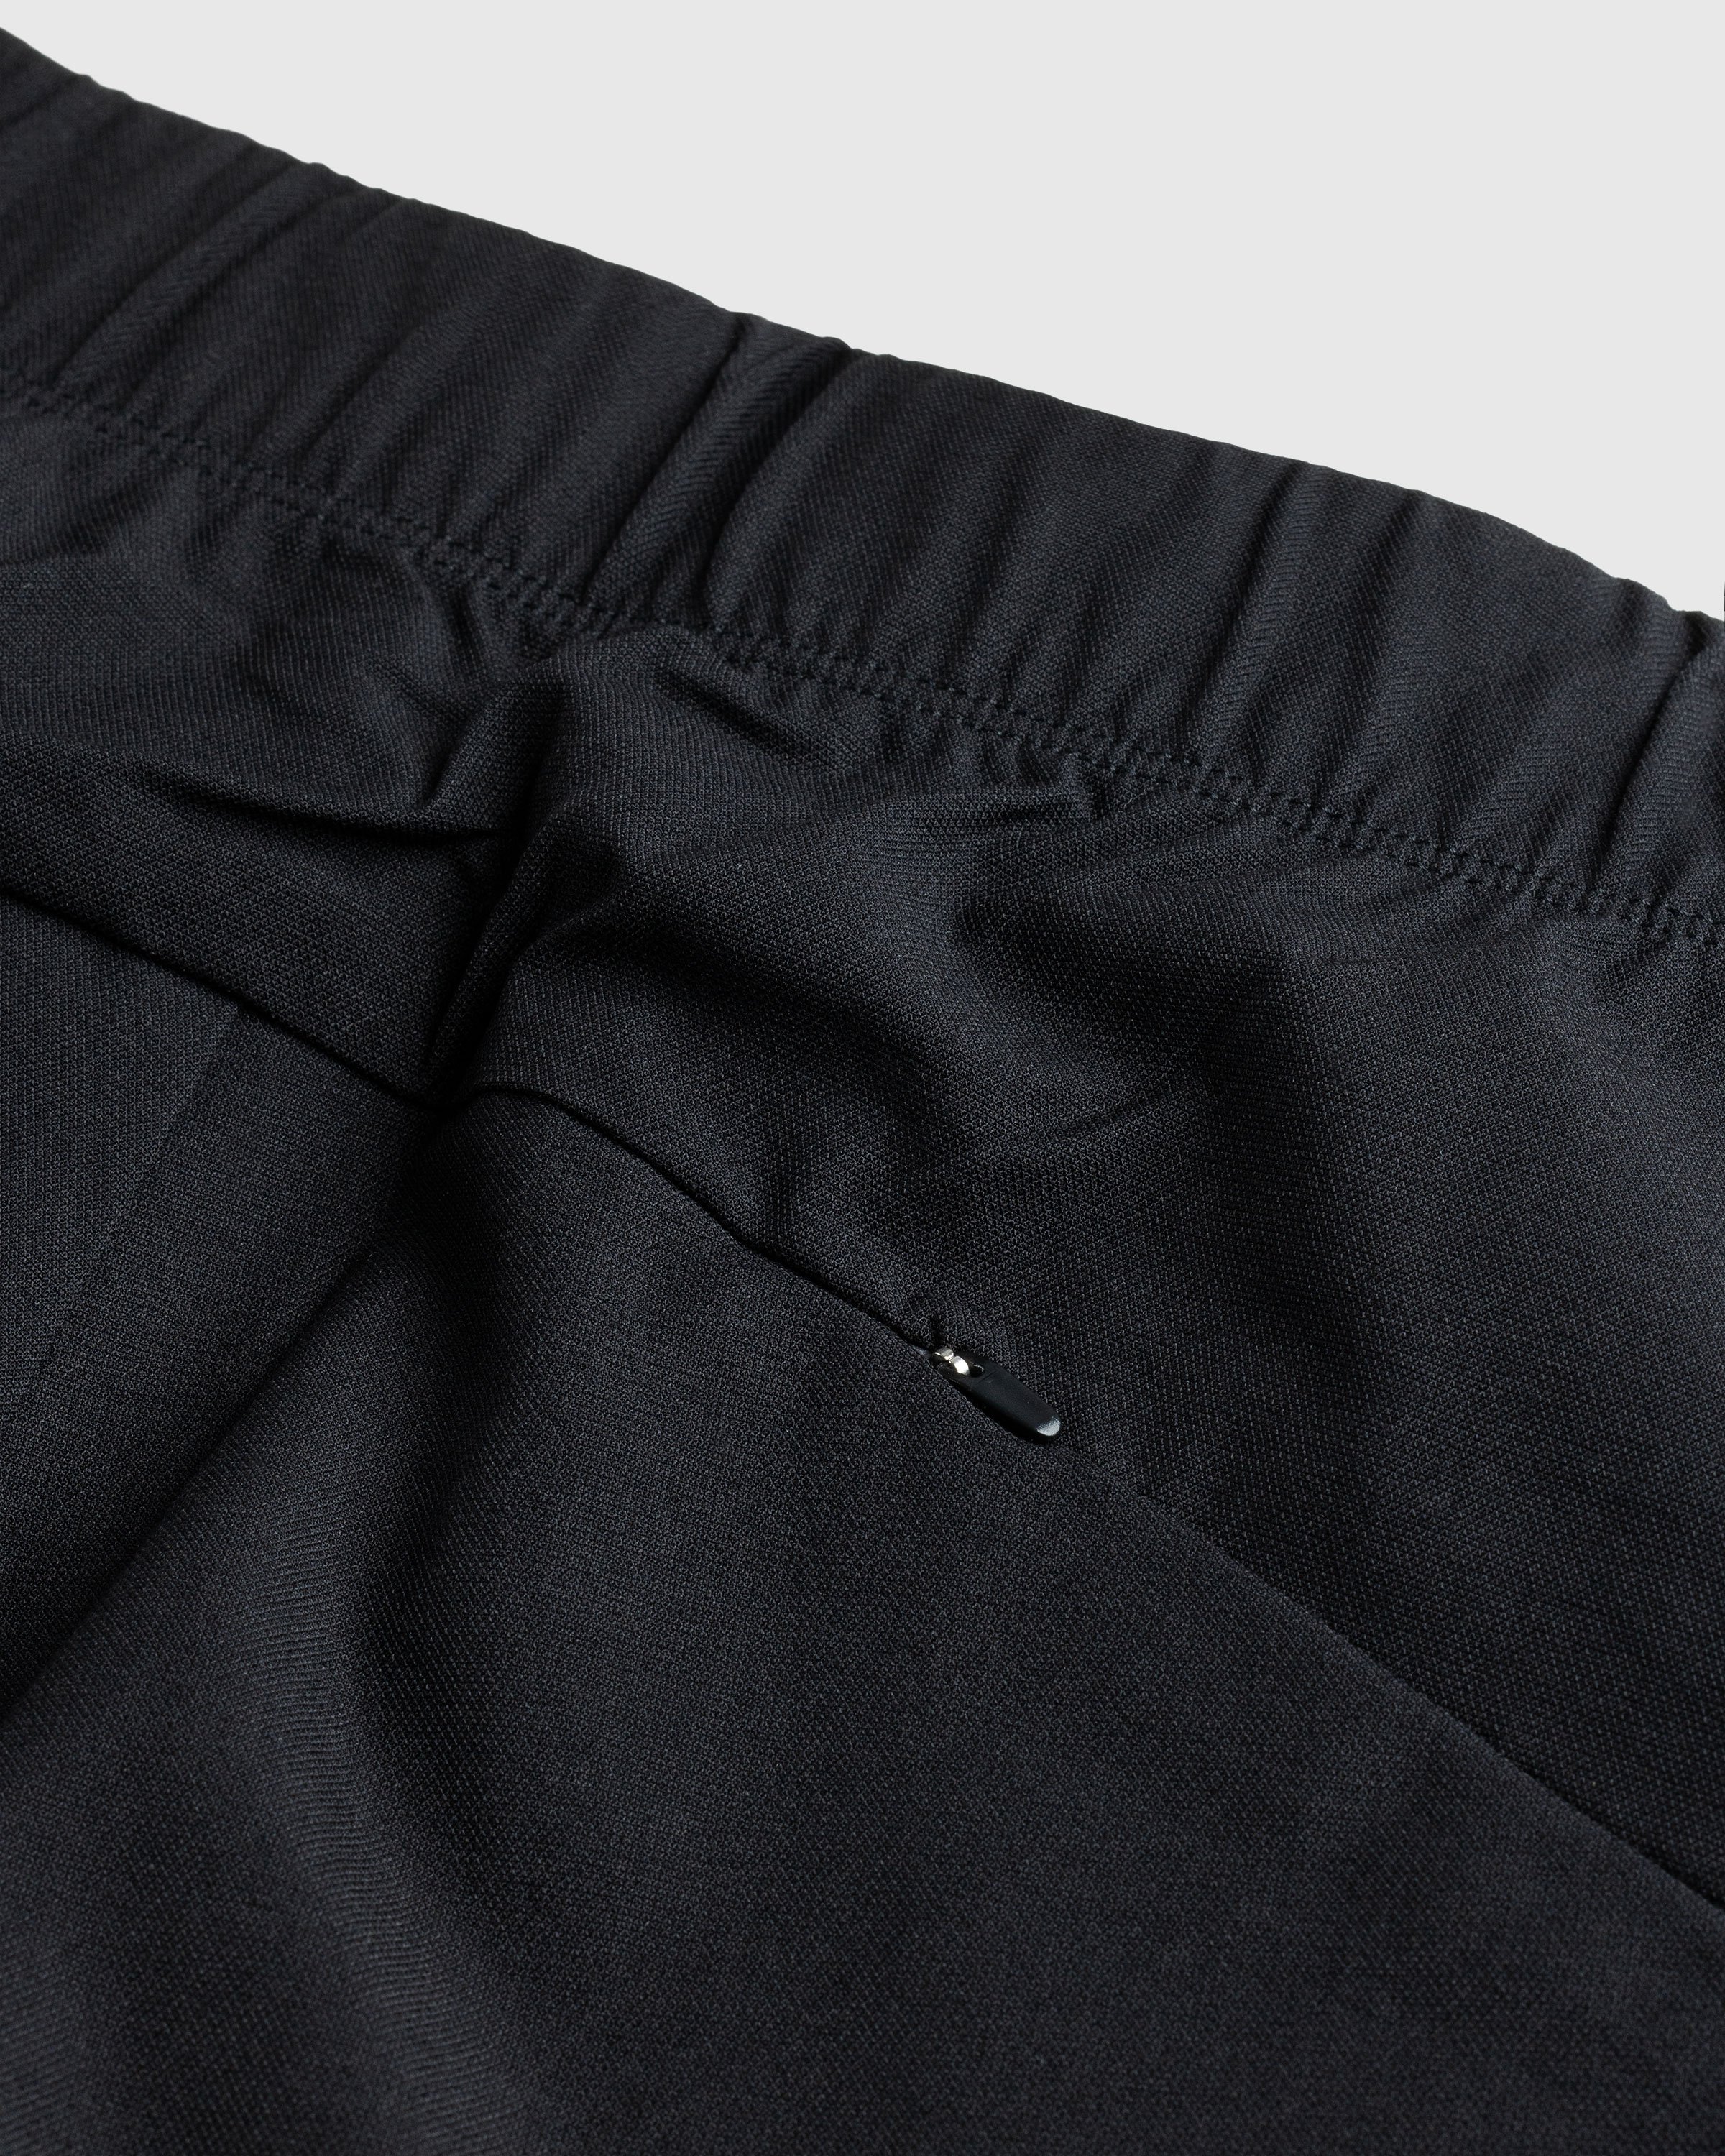 Post Archive Faction (PAF) - 5.1 Technical Pants Right Black - Clothing - Black - Image 7